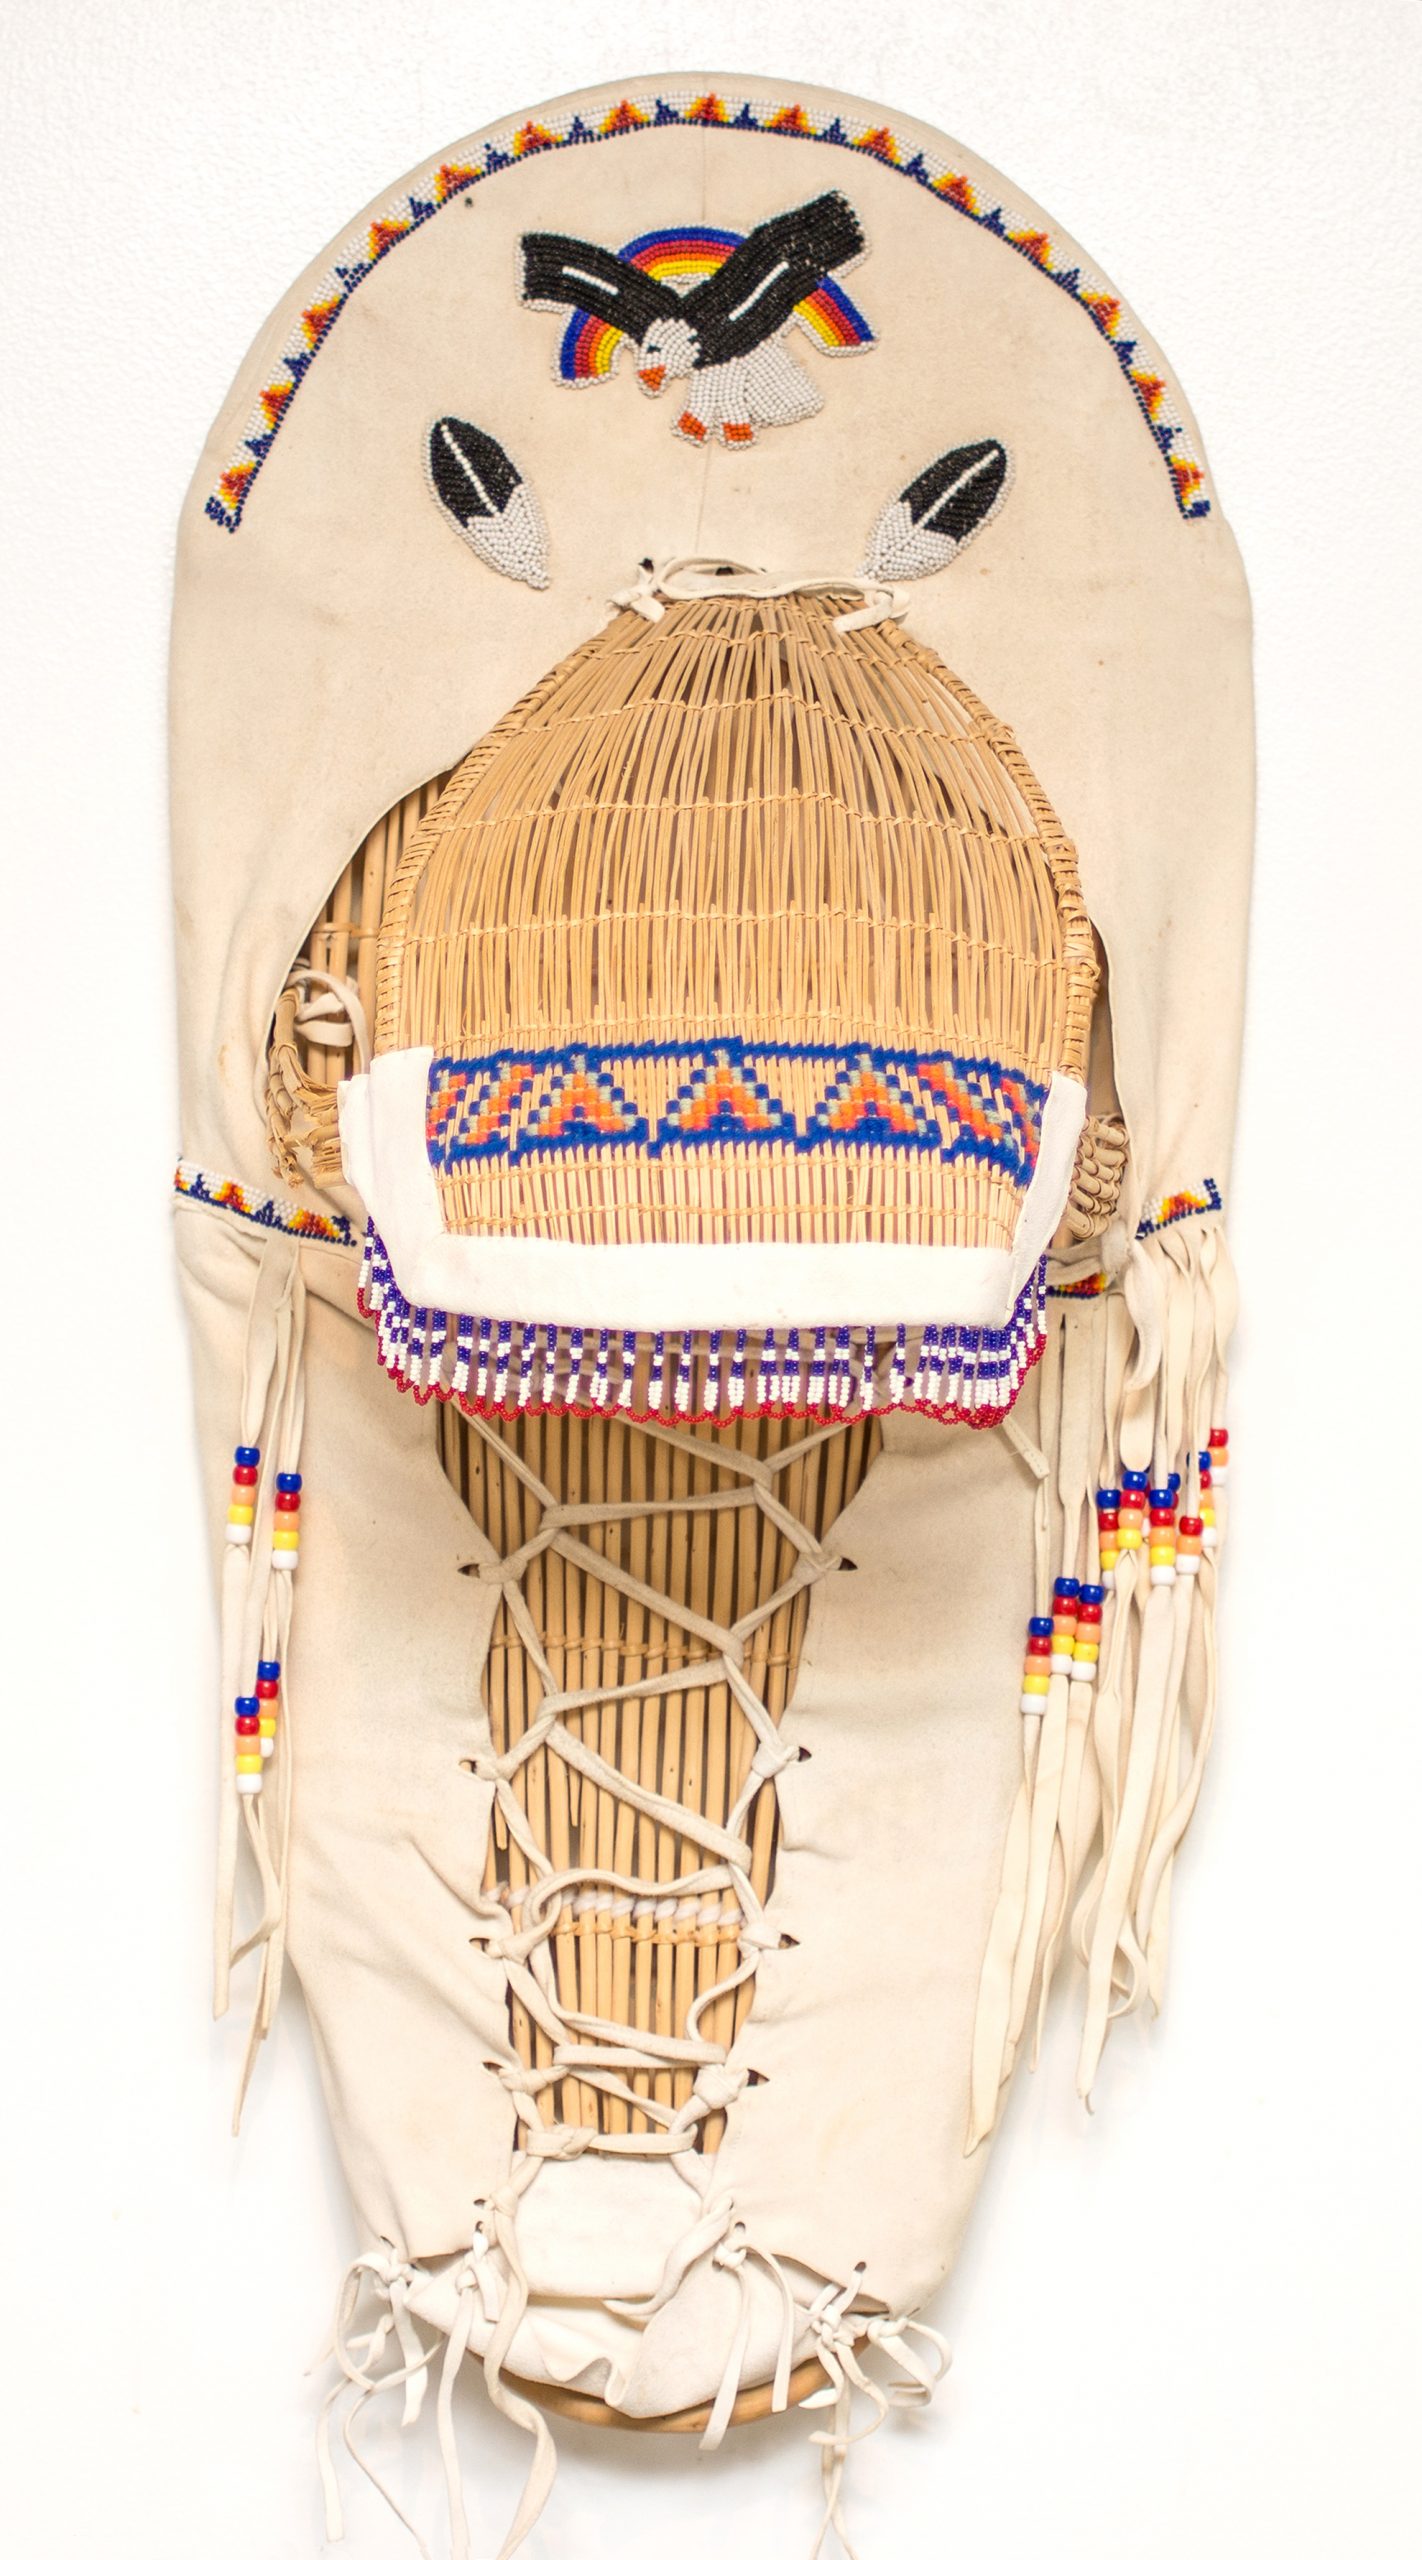 Artist/Maker: Alice and Patrick Sabourin First Nation: Anishinaabae Location: Ojibway Netmizaaggamig, Pic River First Nation, Pic Mobert First Nation, Northwestern Ontario, Canada Date: mid-20th century